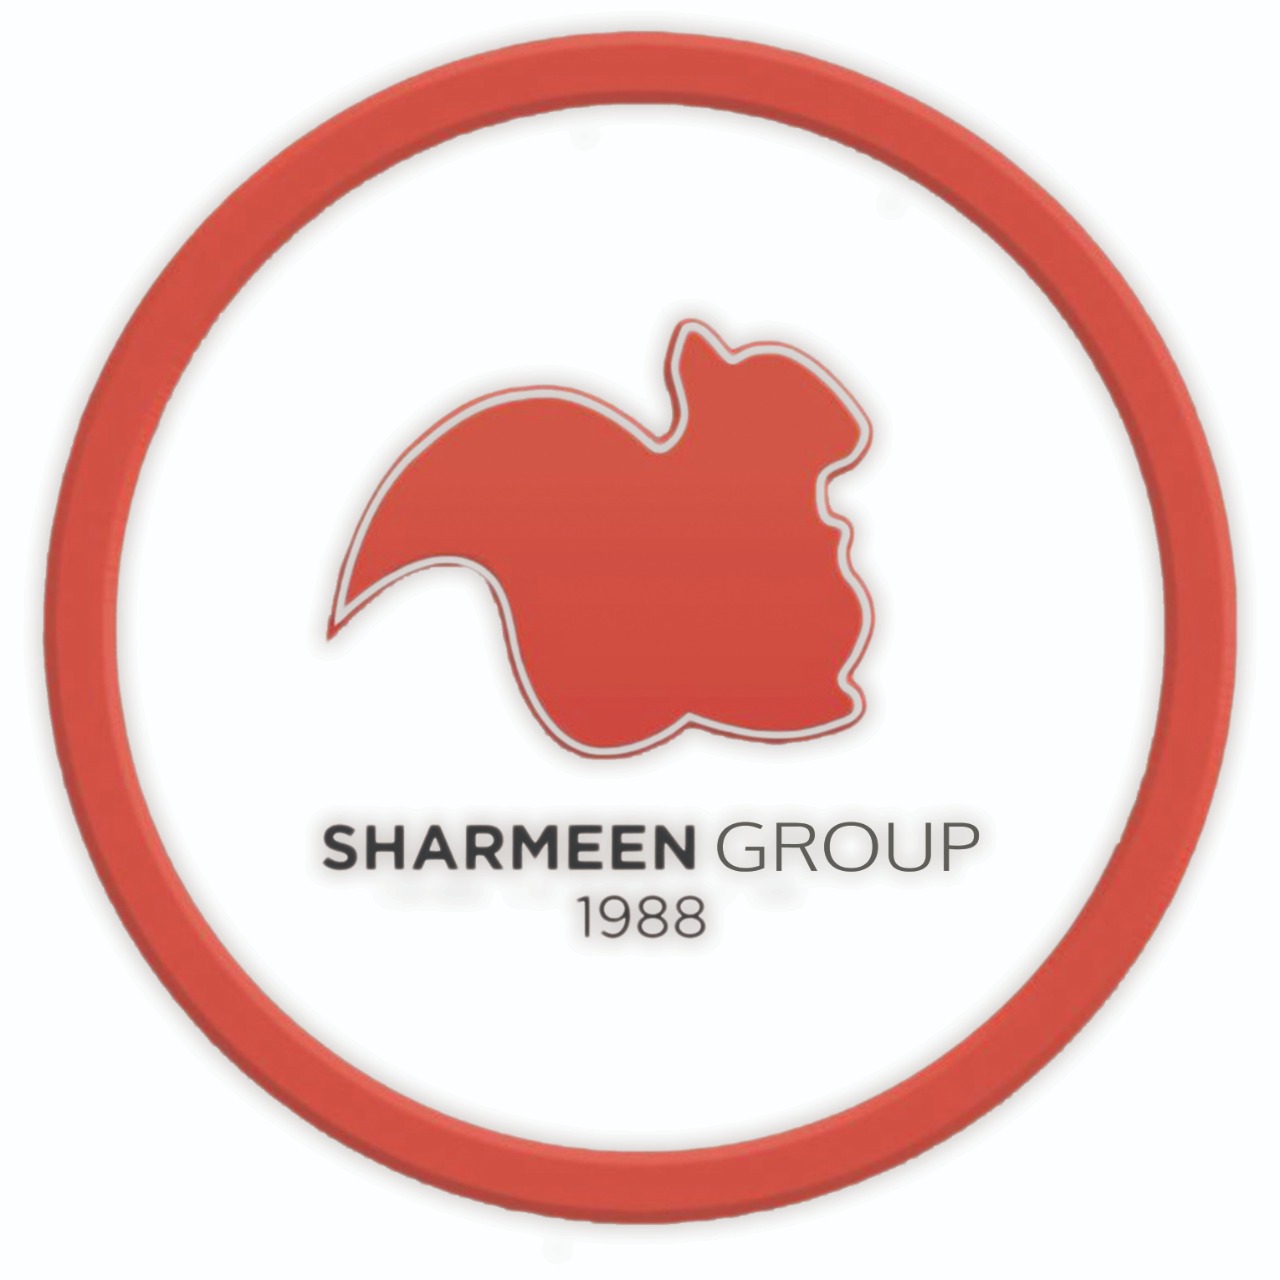 https://www.pakpositions.com/company/sharmeen-group